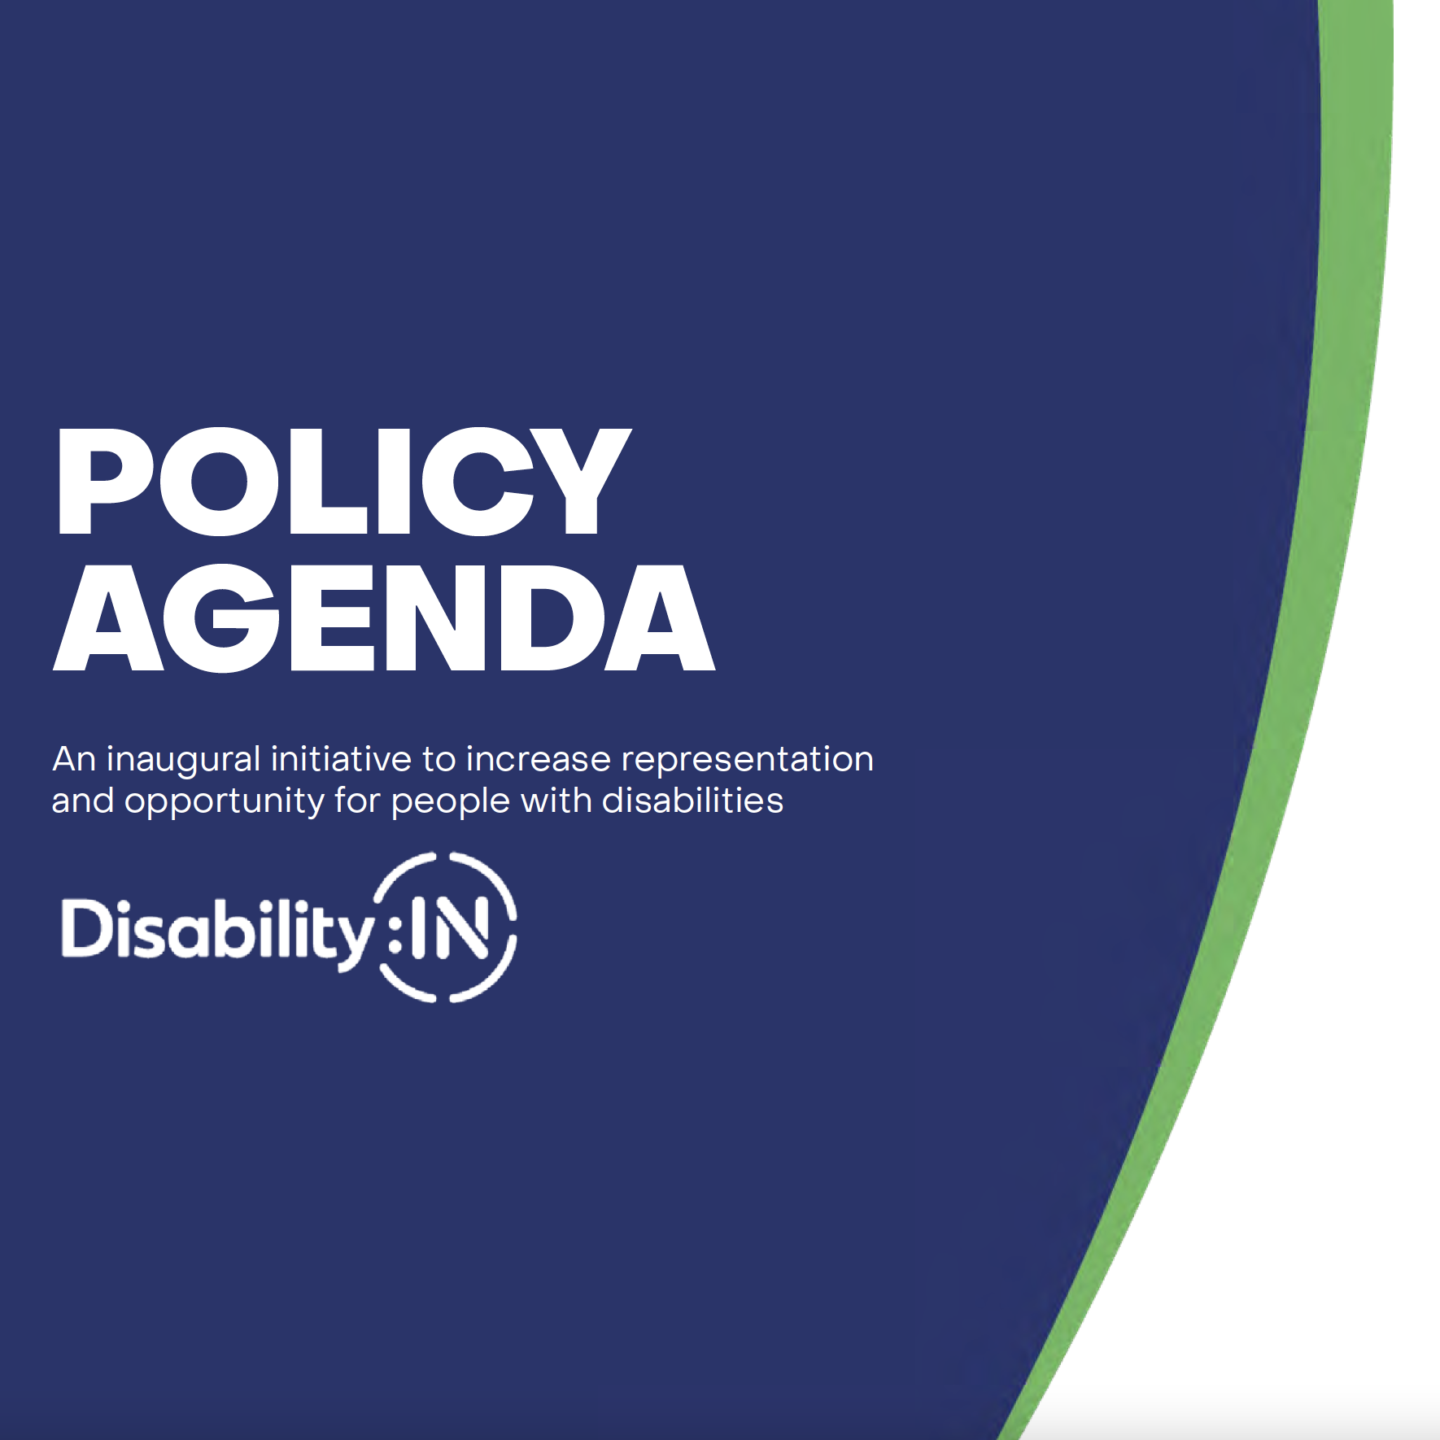 Policy Agenda. An inaugural initiative to increase representation and opportunity for people with disabilities.